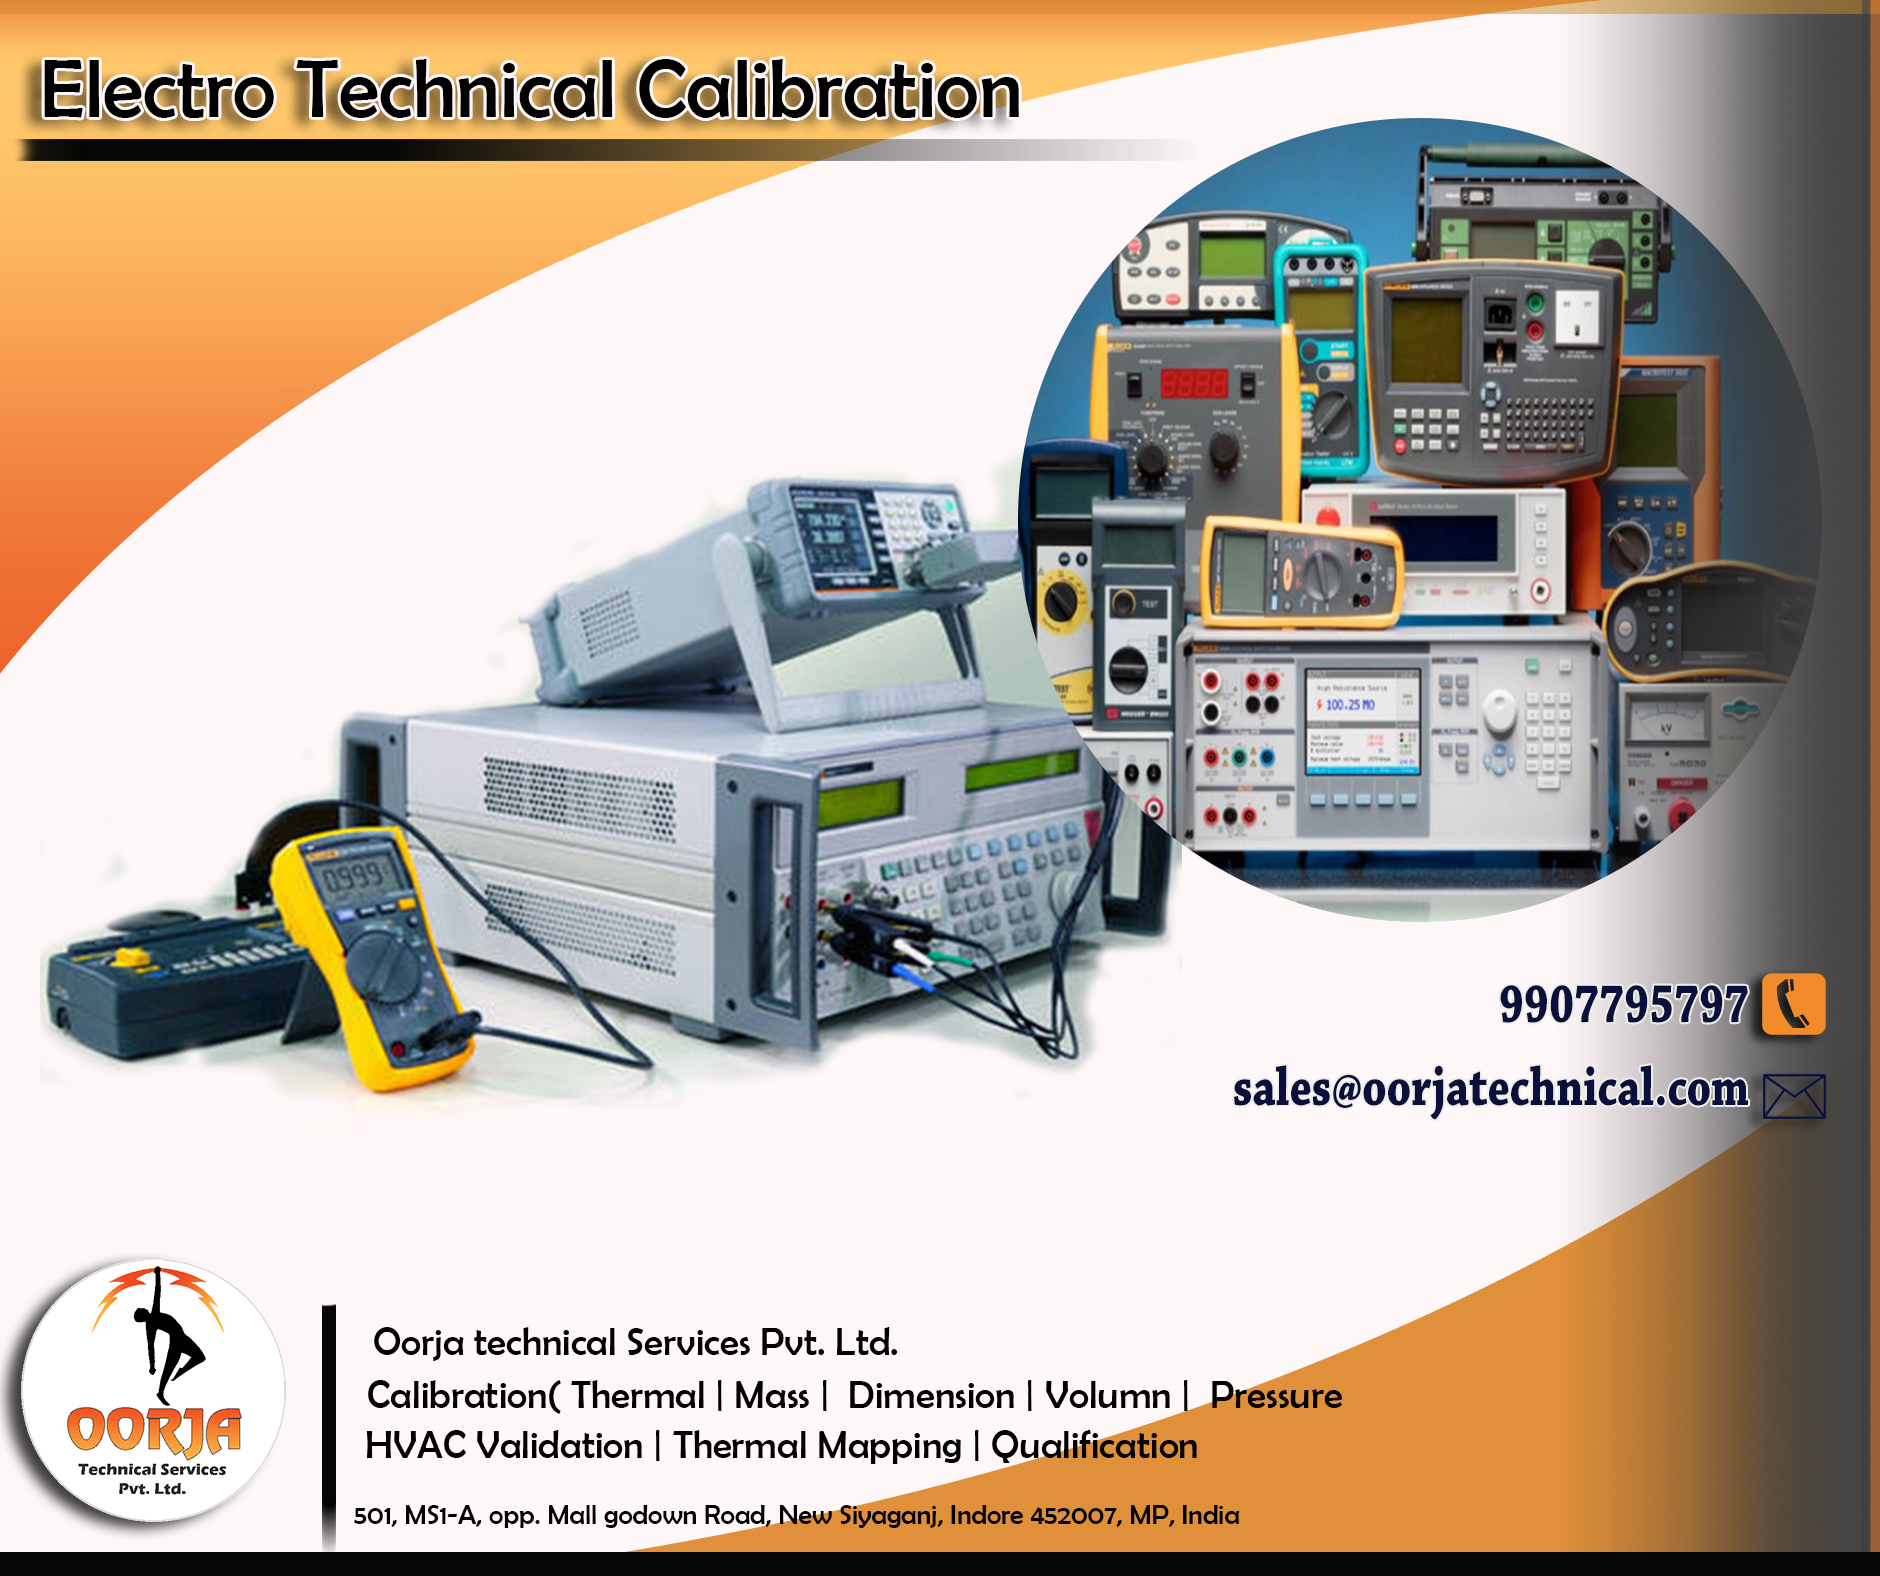 Electrotechnical Calibration